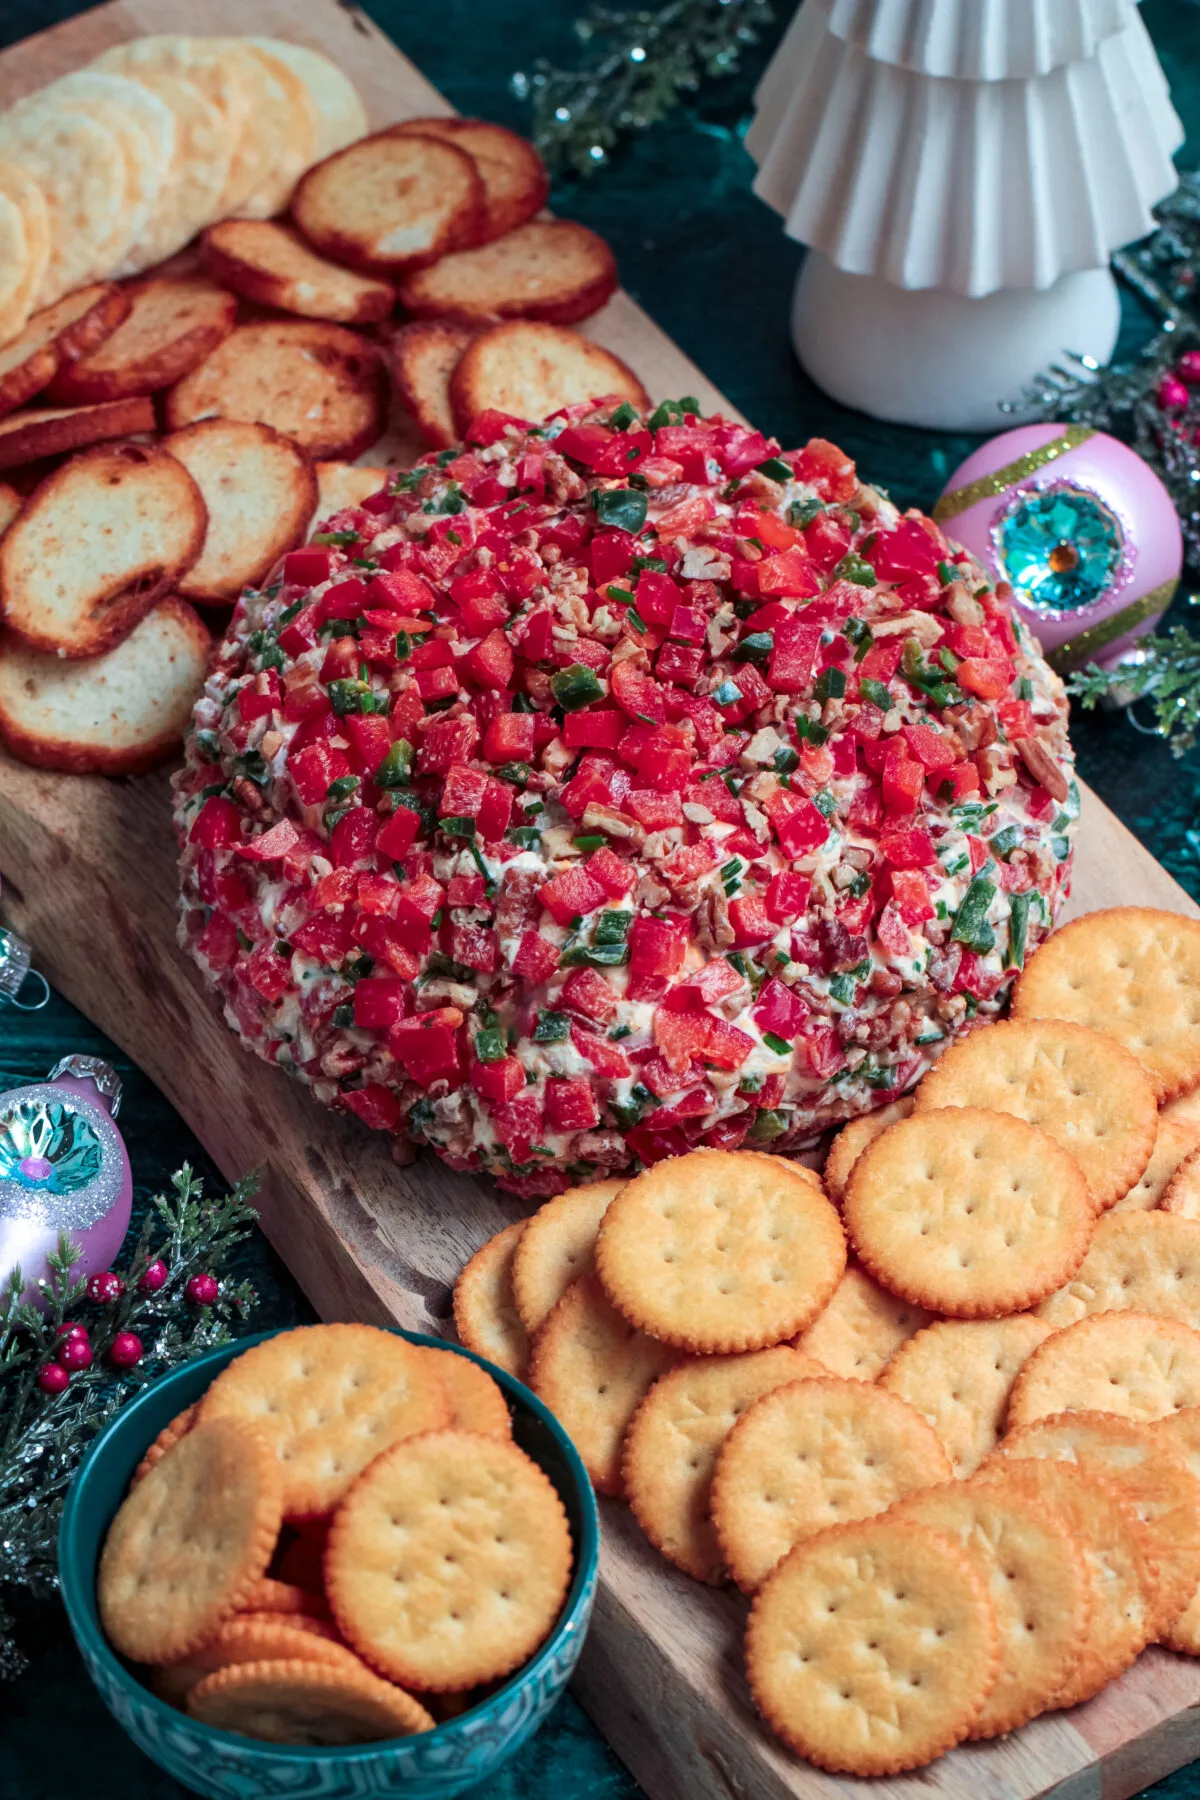 Celebrate the holidays with this simple recipe for a Christmas cheese ball made with sharp cheddar, bell peppers, pecans, and more!